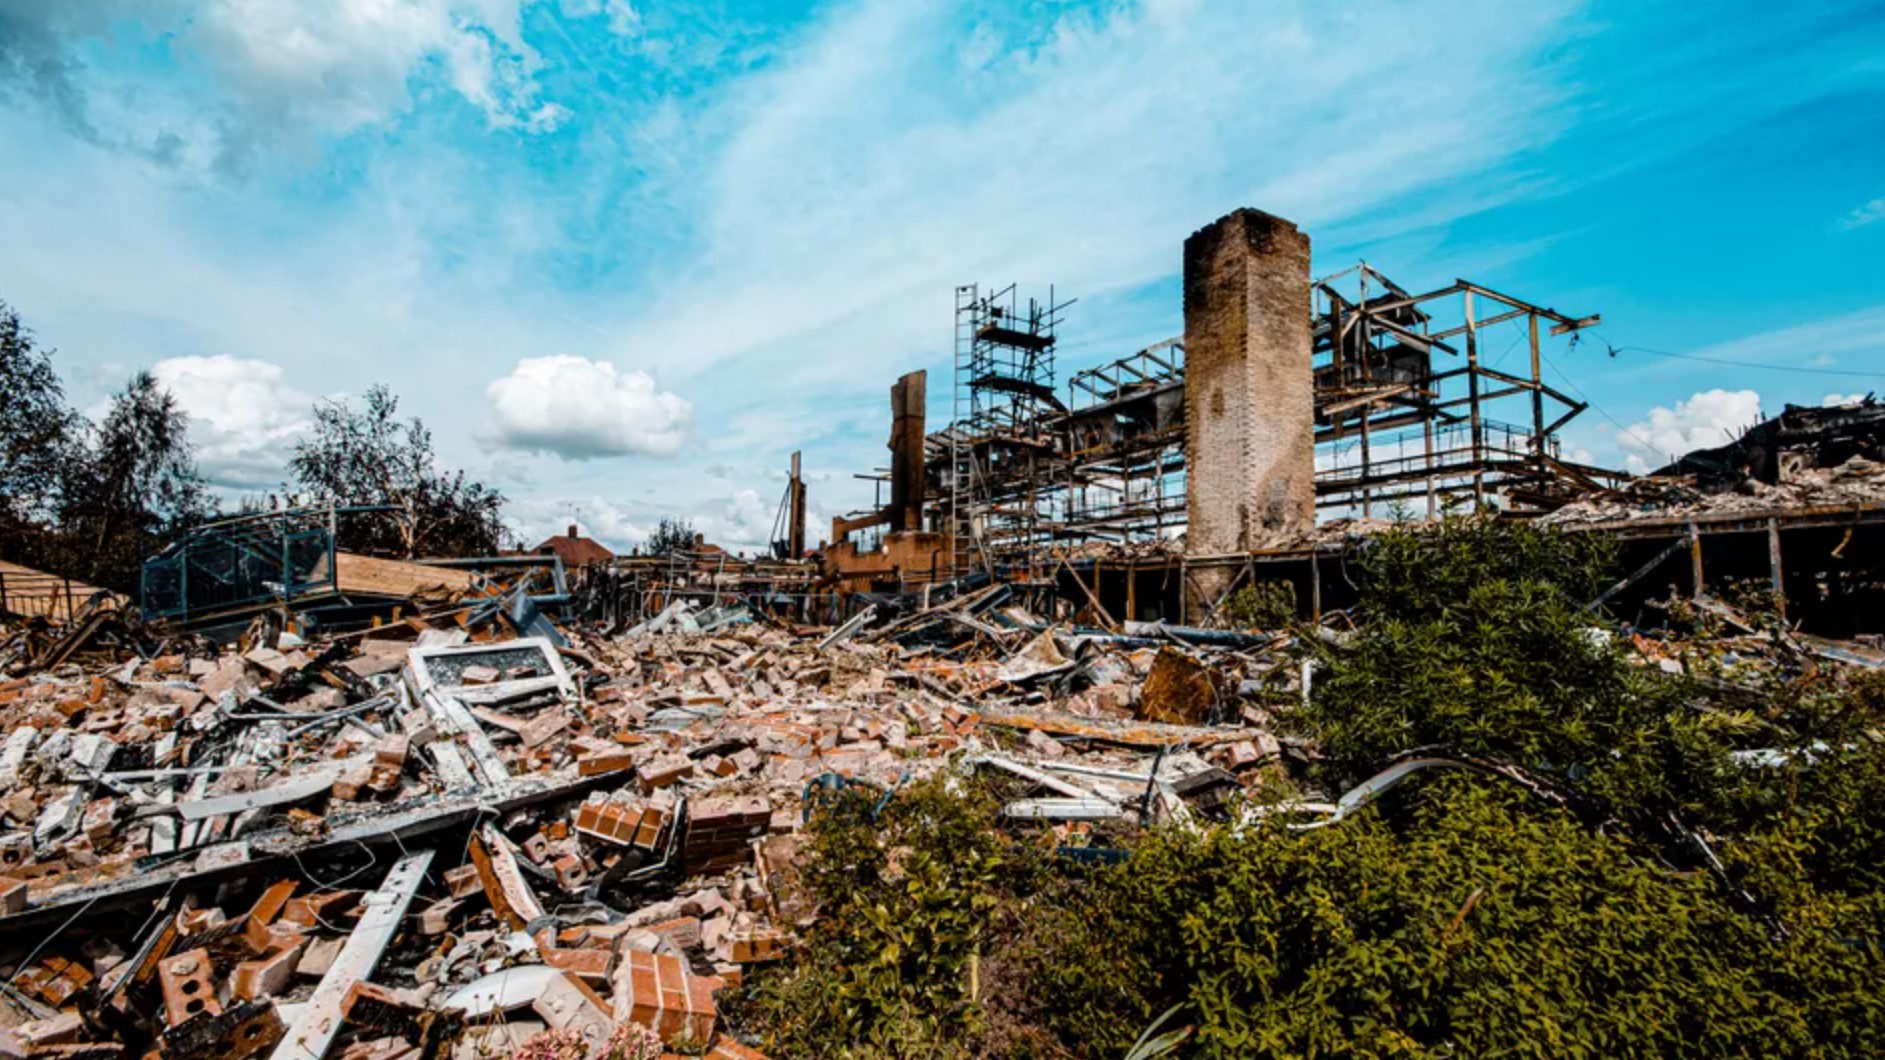 Aftermath of the Beechmere care home fire in 2019. Image Cheshire Fire and Rescue Service 